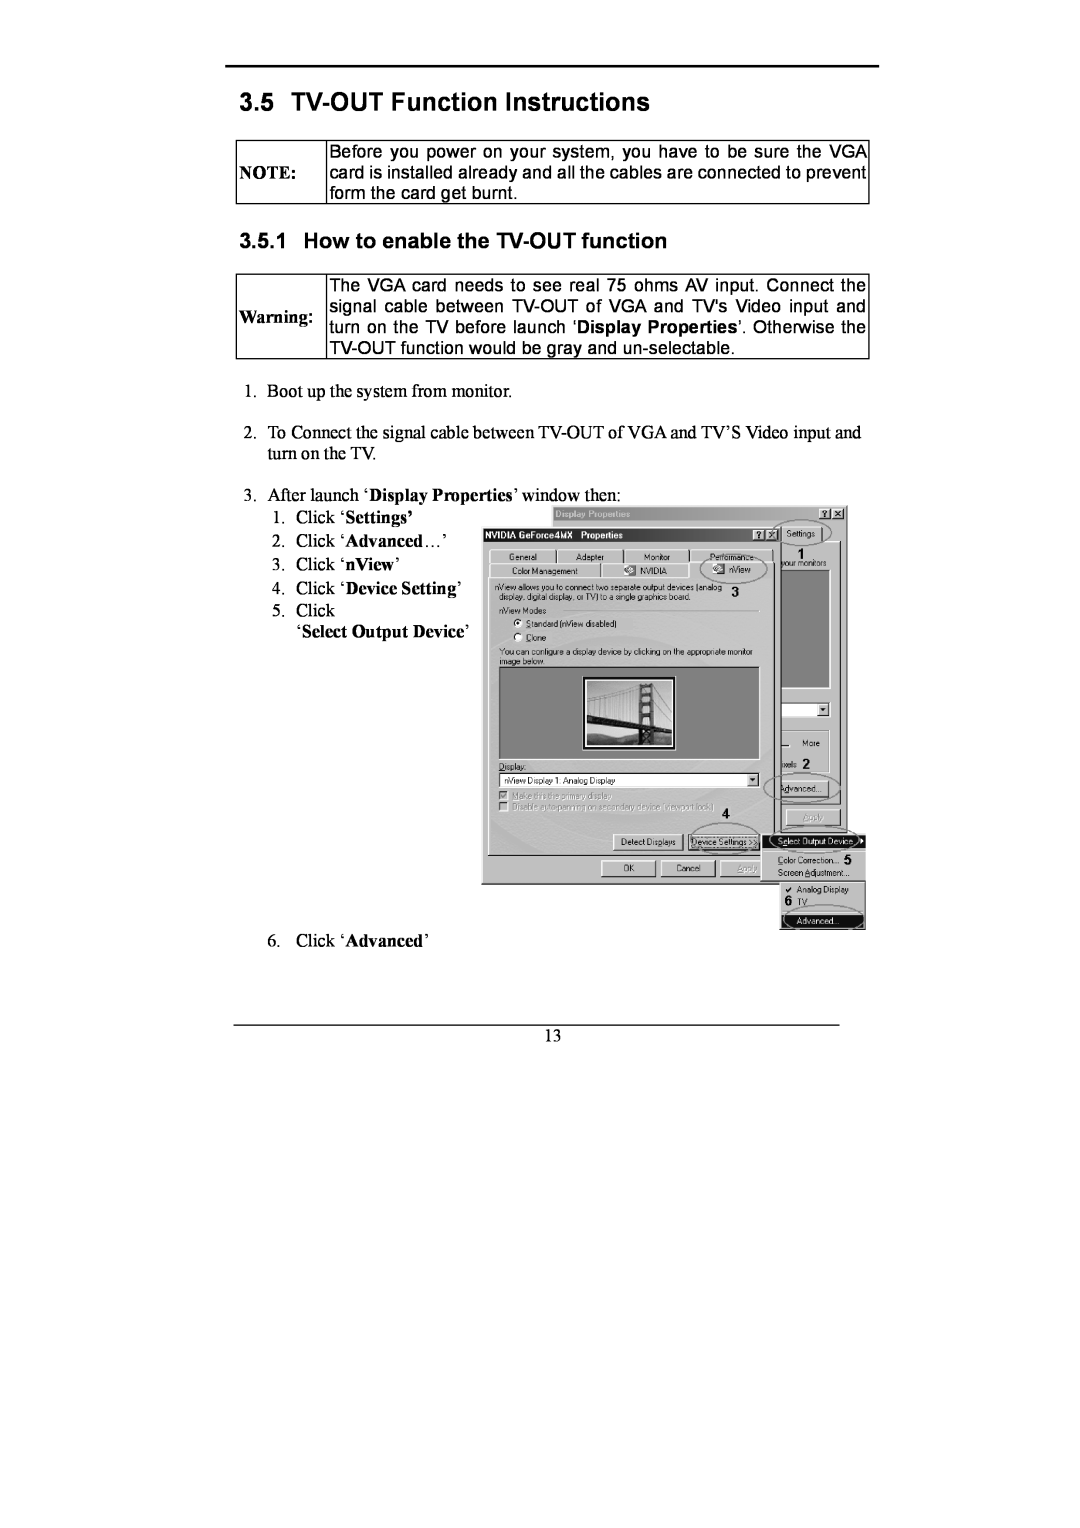 Nvidia GeForce MX Series user manual TV-OUT Function Instructions, How to enable the TV-OUT function, Click ‘Settings’ 